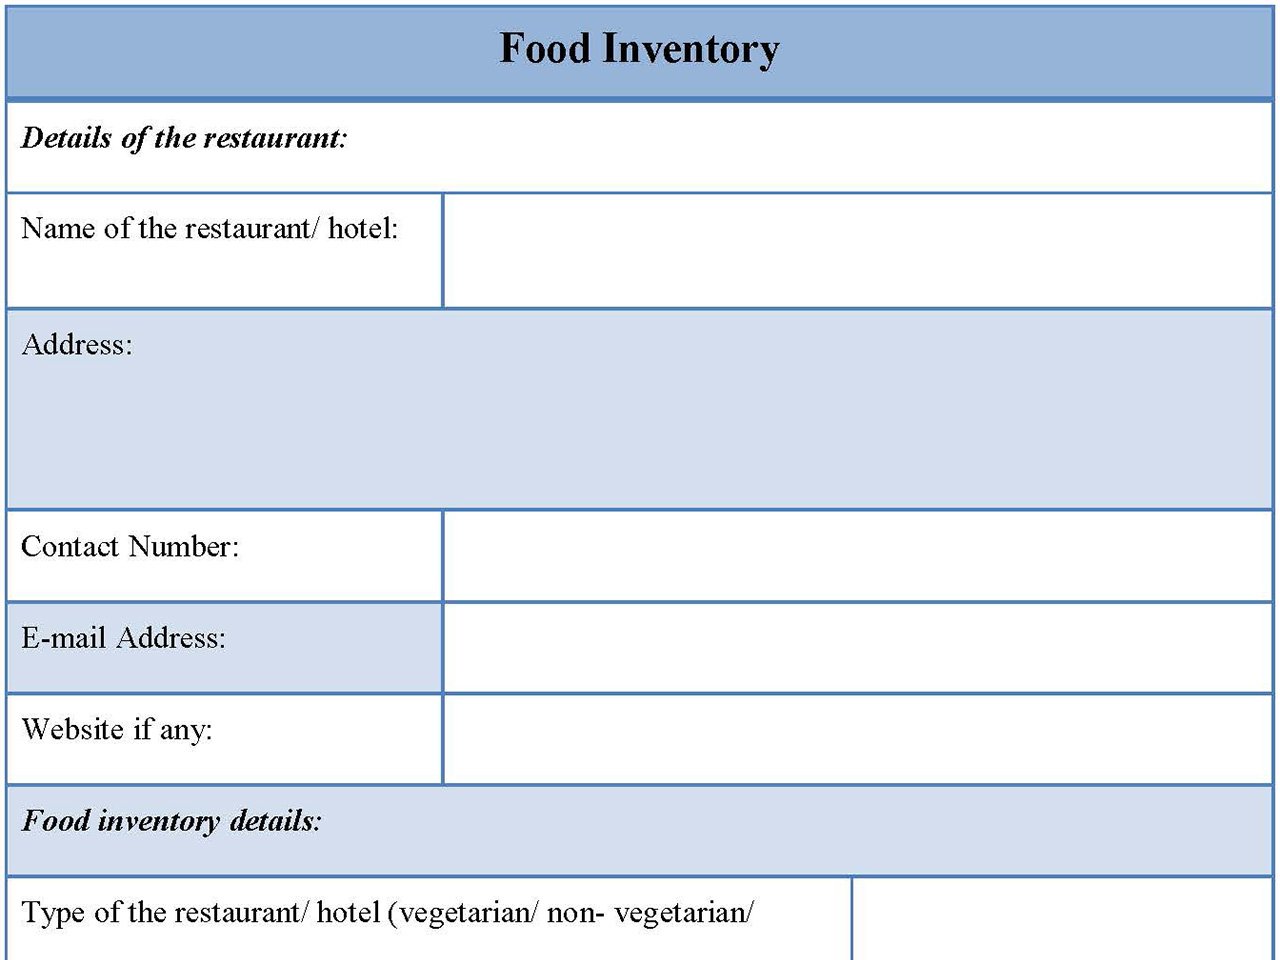 Food inventory form